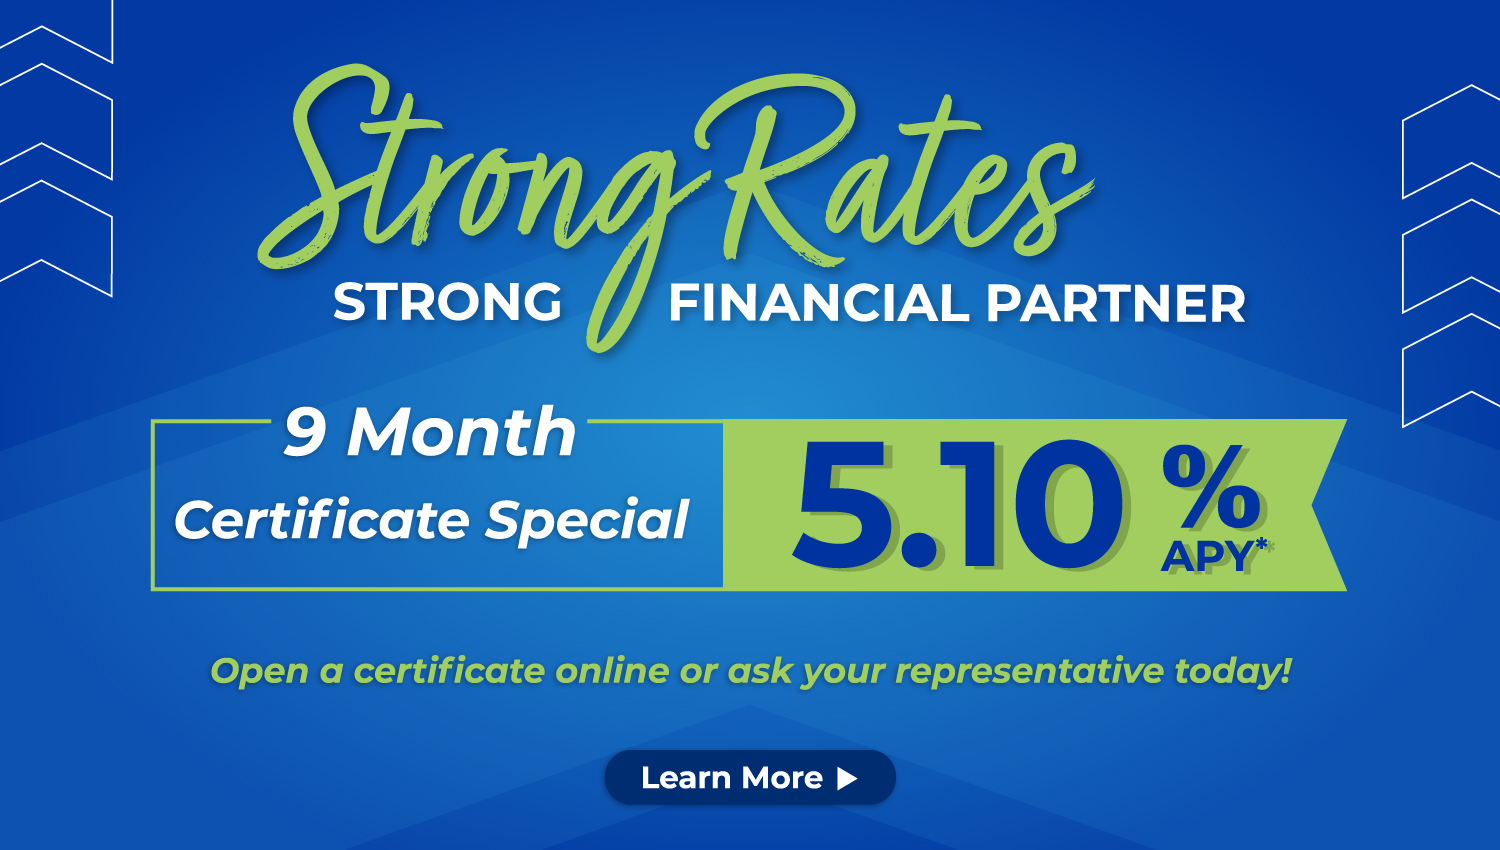 Strong Rates: 9-month CD rate 5.1%